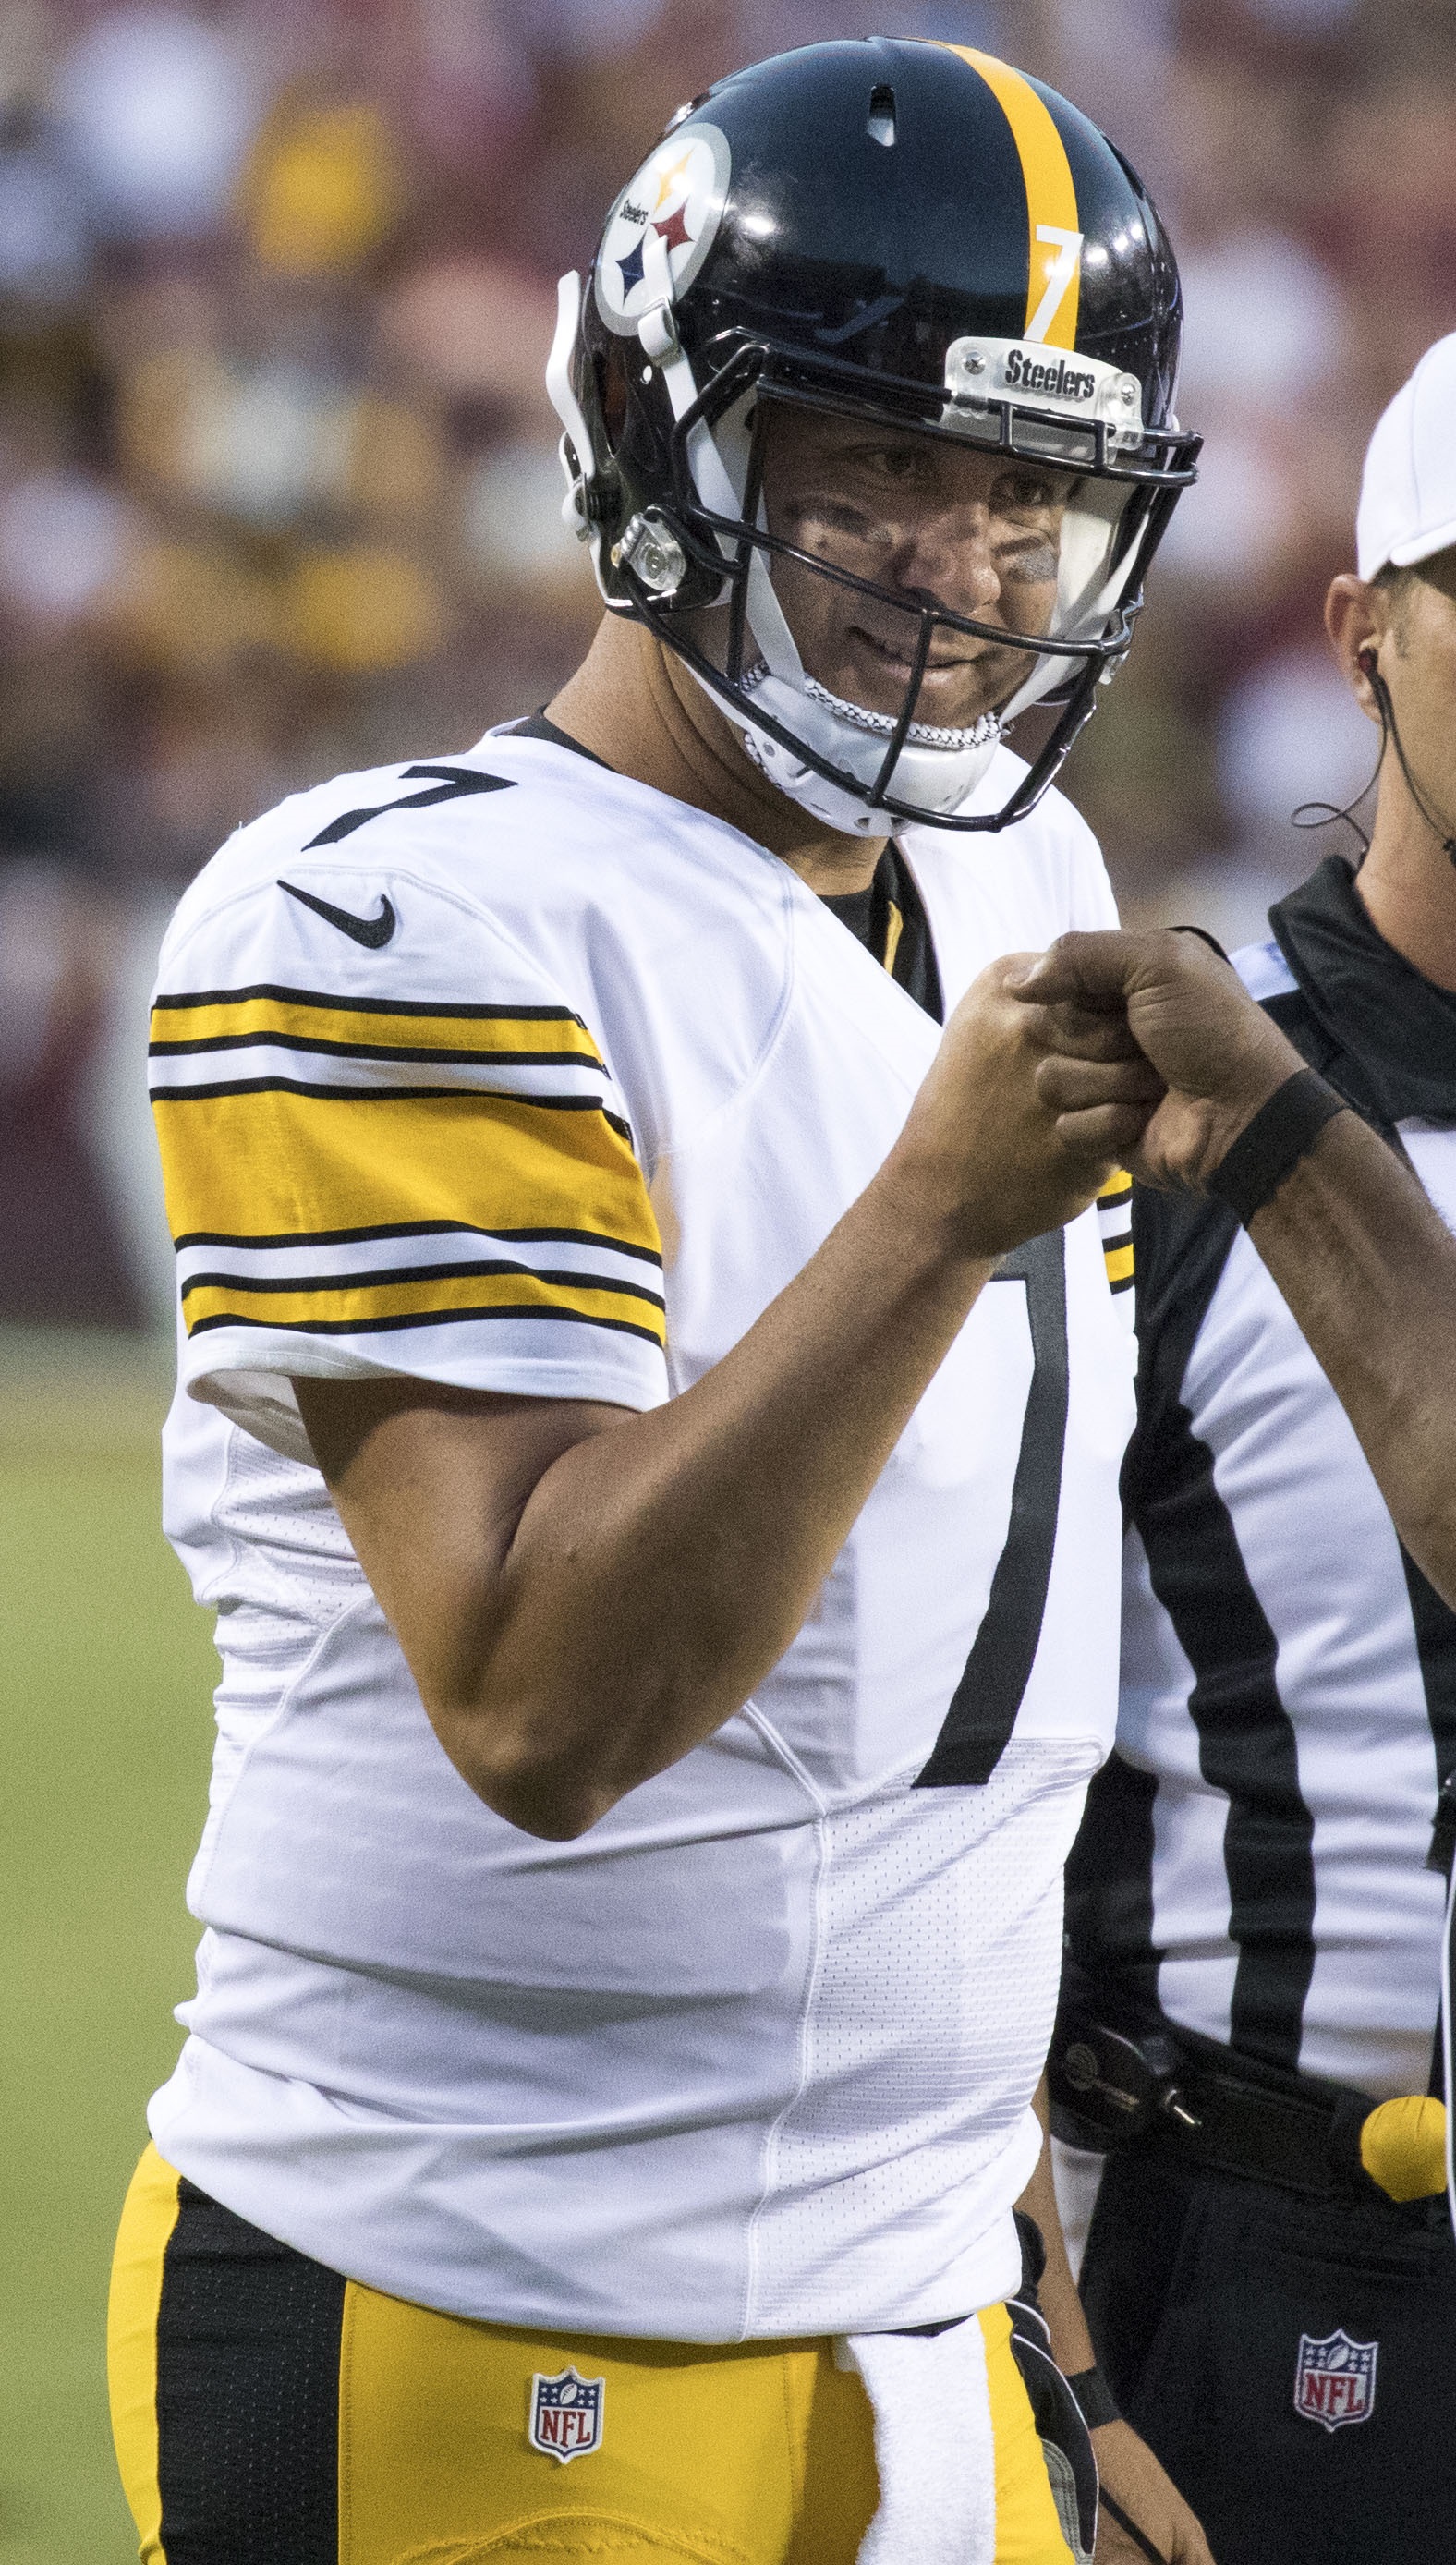 Sports News Roundup: NFL-Long-time Steelers QB Roethlisberger announces retirement; Rugby league-Kiwis great Filipaina on ventilator due to kidney failure and more 